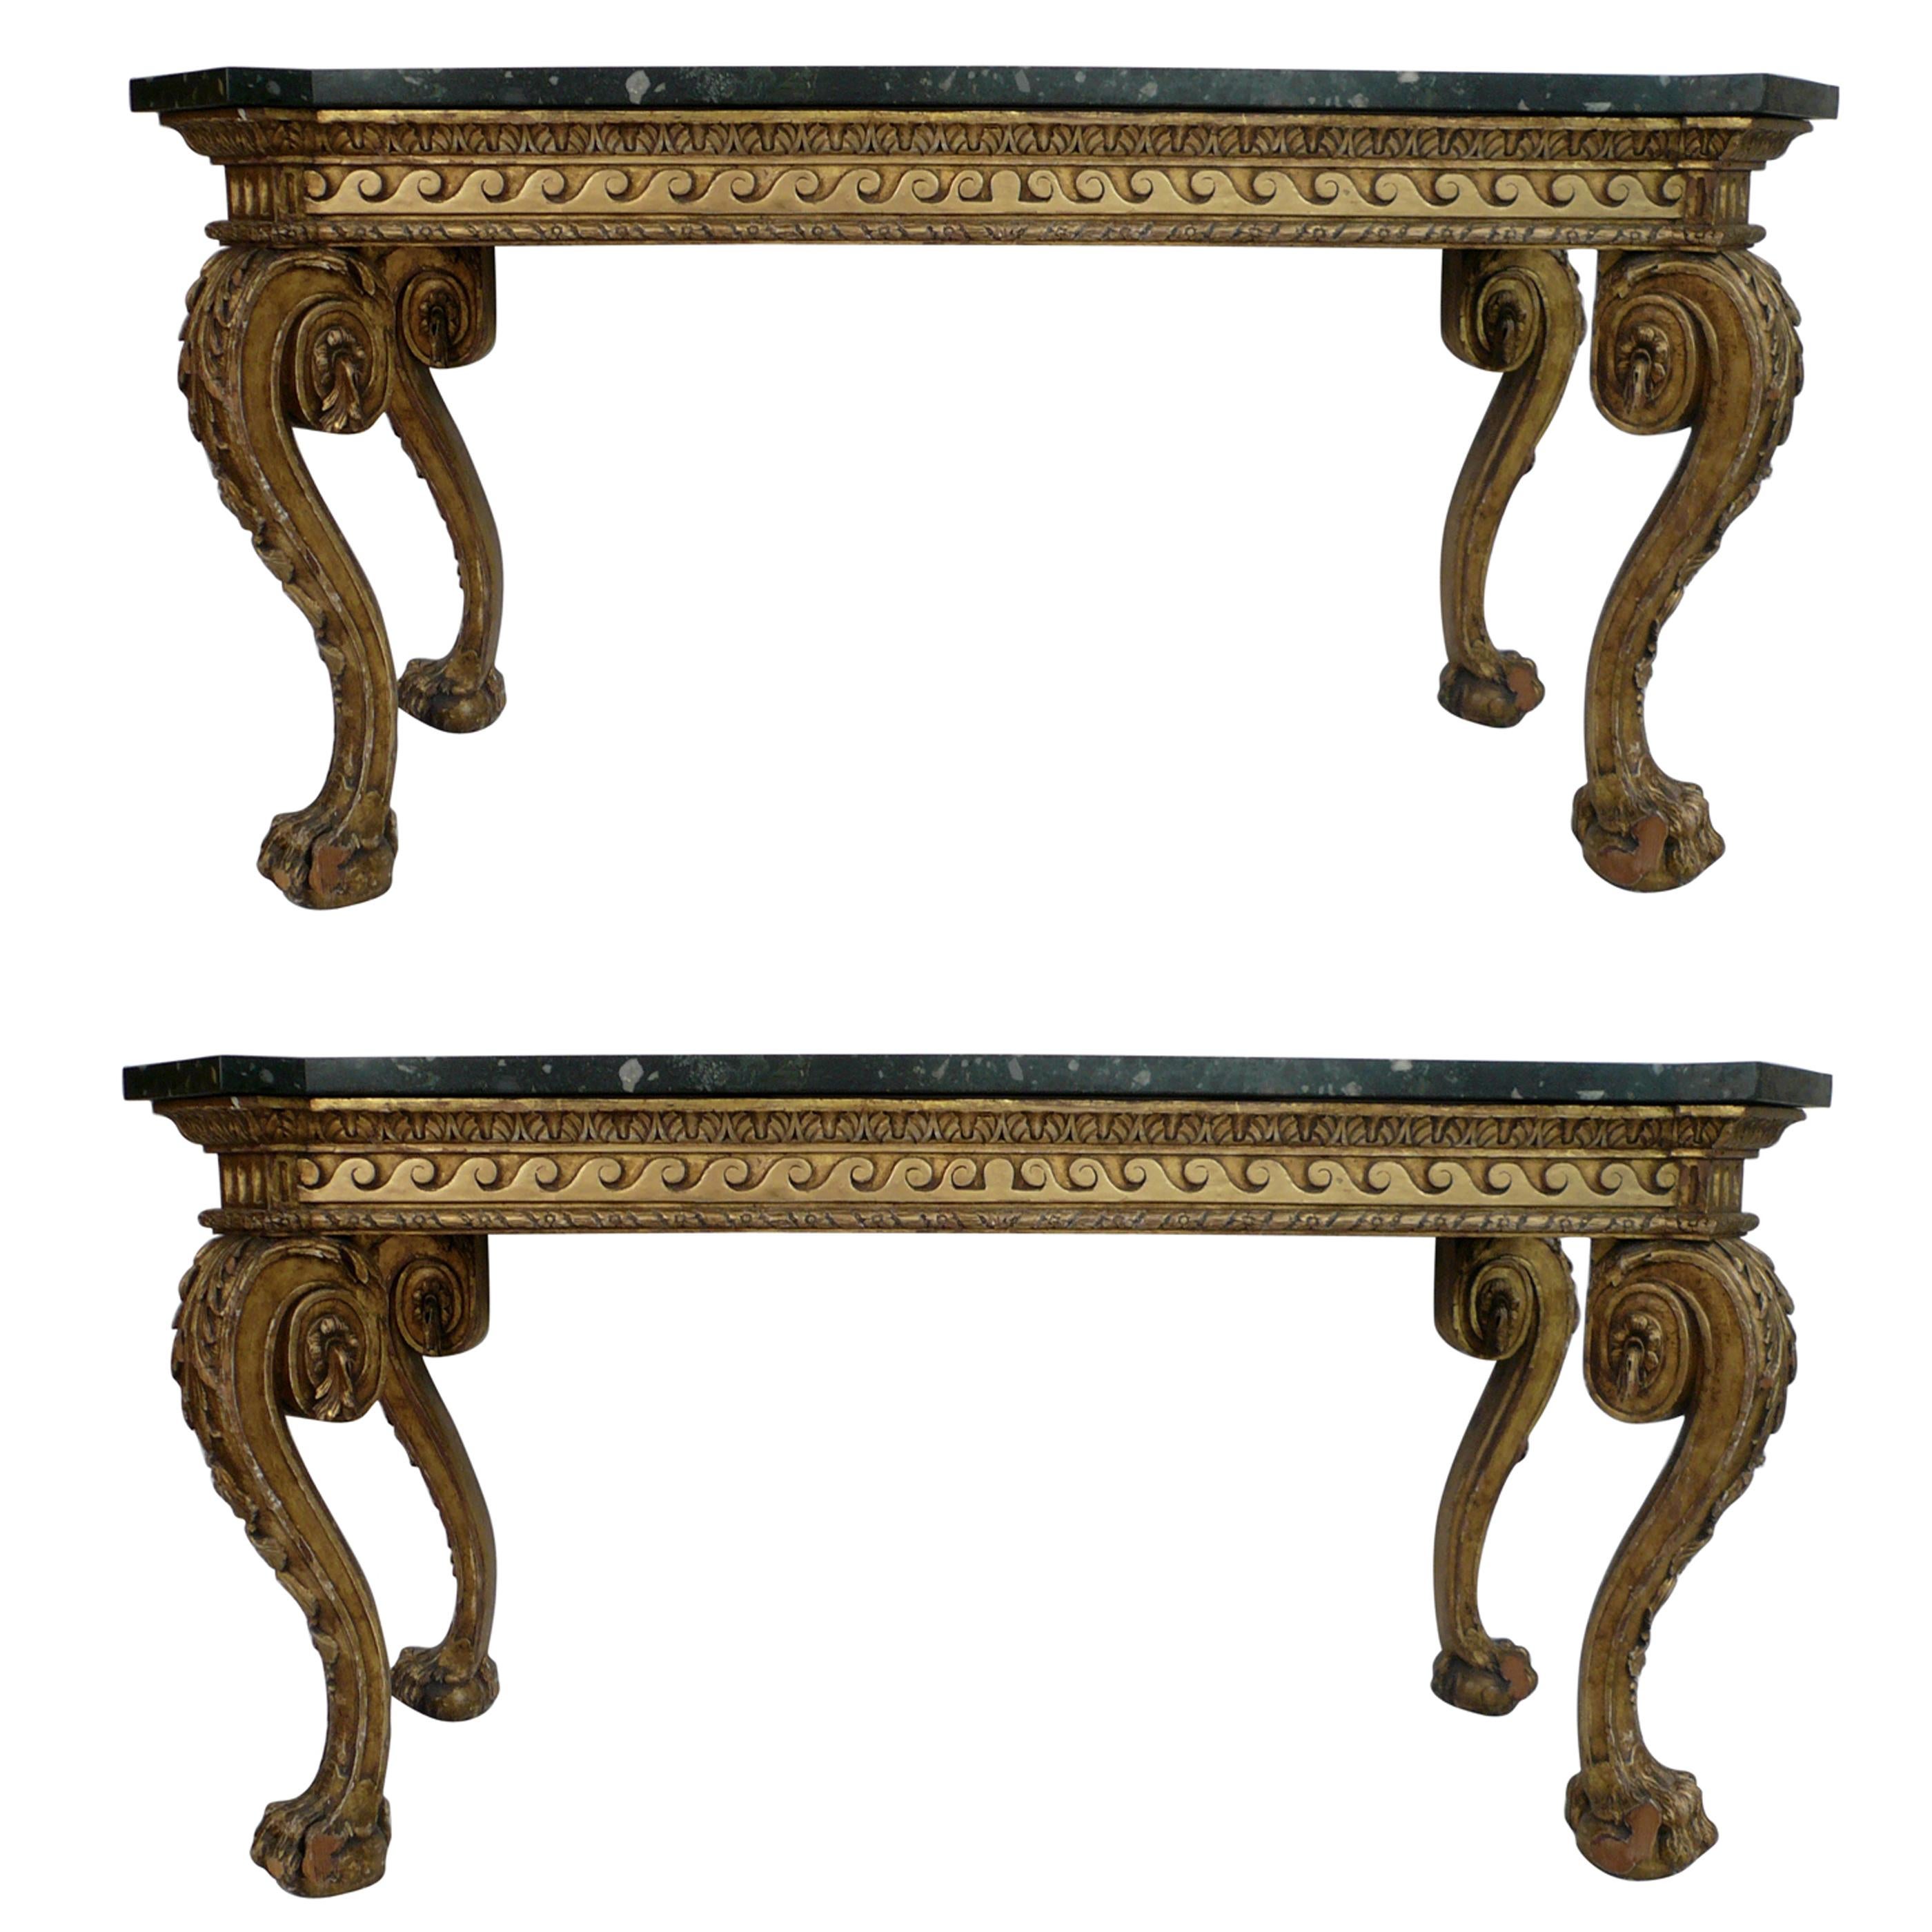 Pair of Giltwood Marble-Top Console Tables in the Manner of William Kent